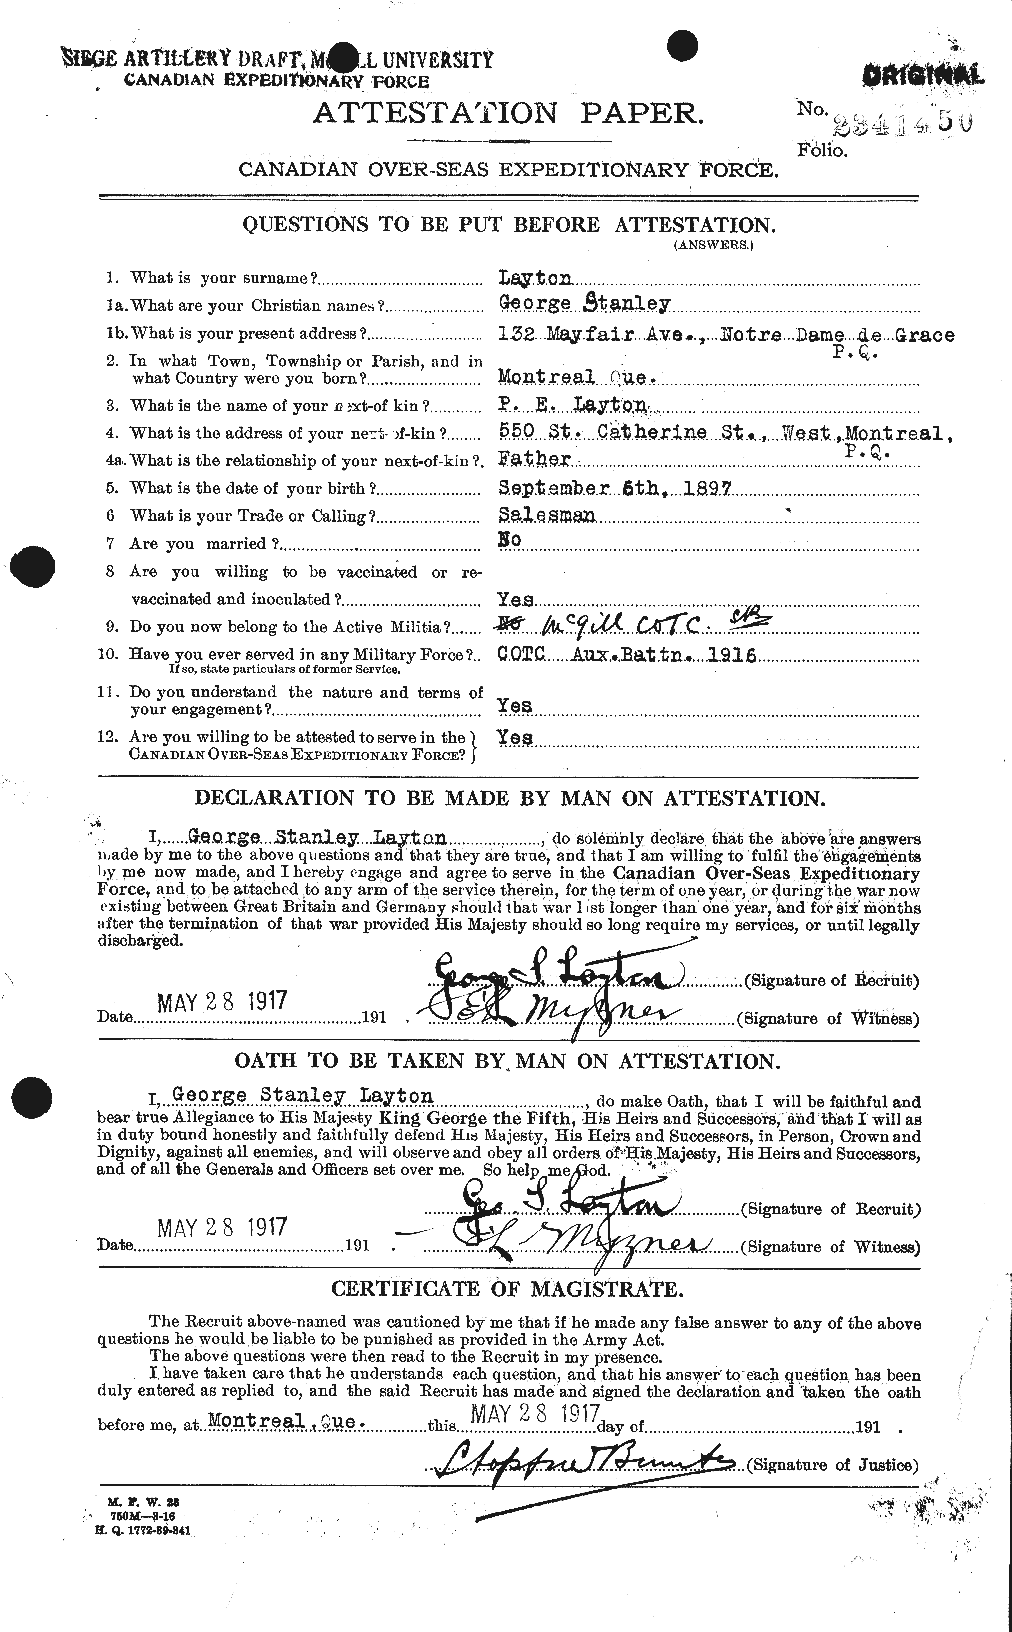 Personnel Records of the First World War - CEF 453139a